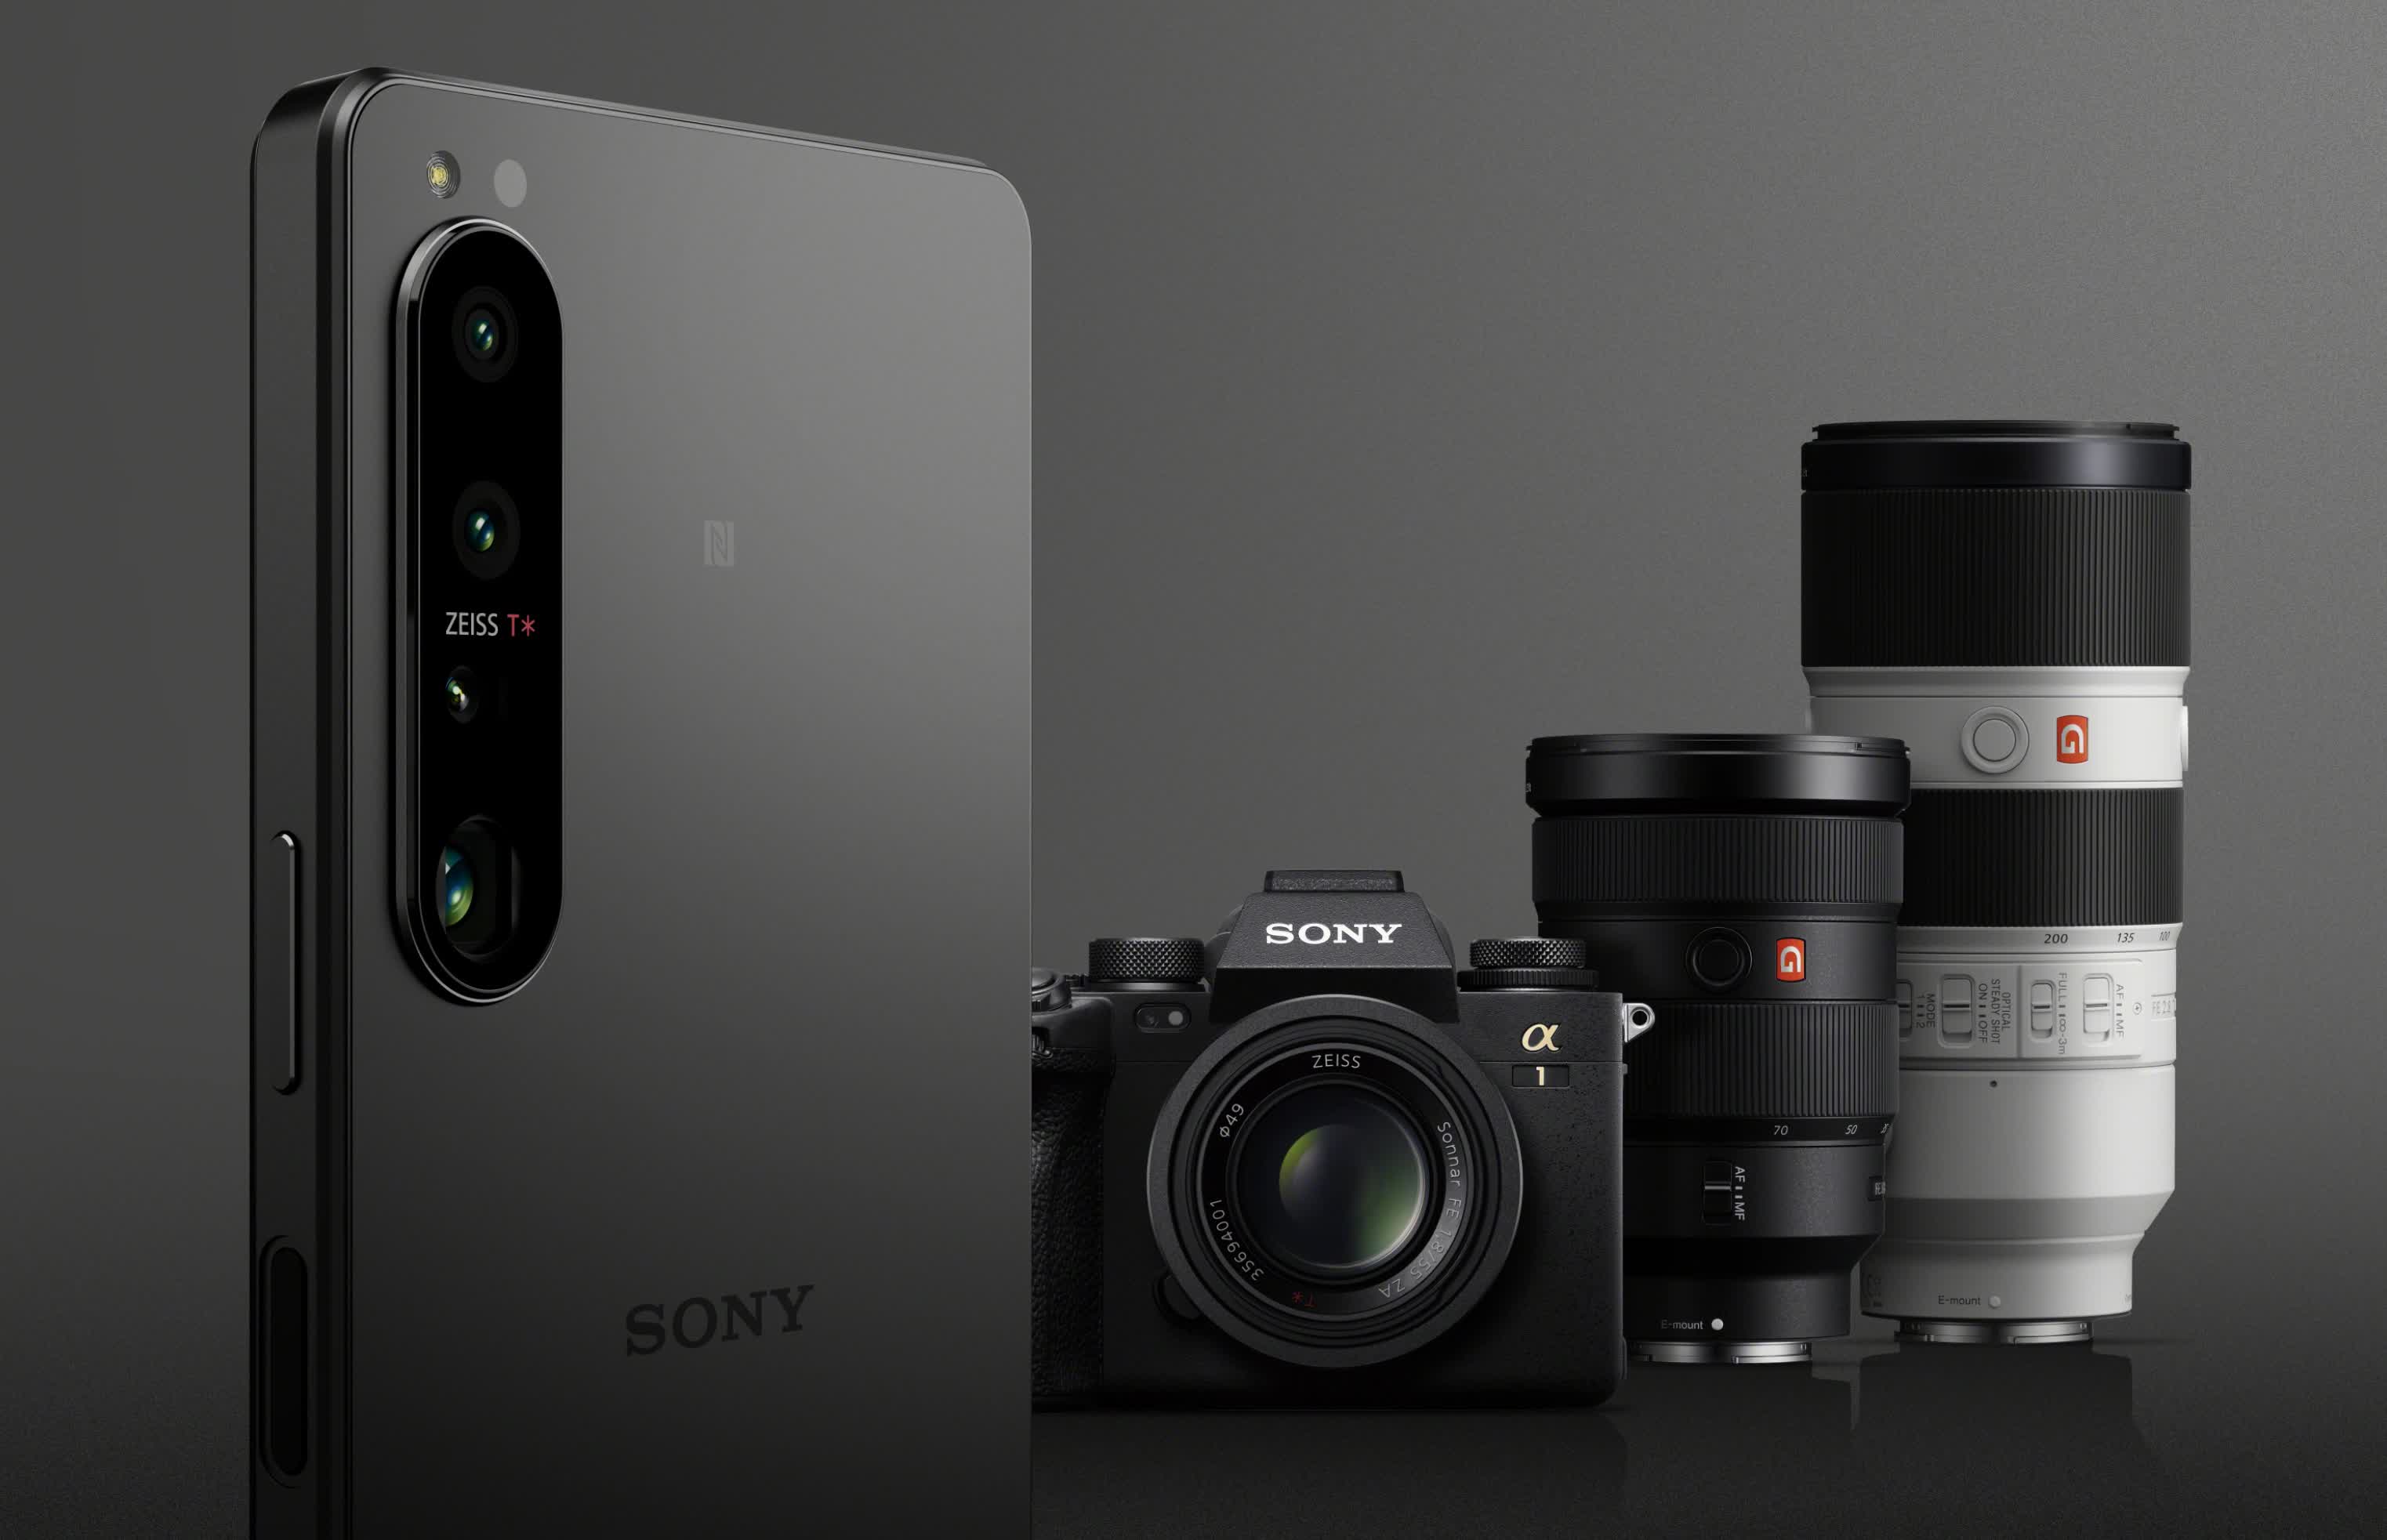 Sony's Xperia 1 IV smartphone boasts the world's first true optical zoom lens